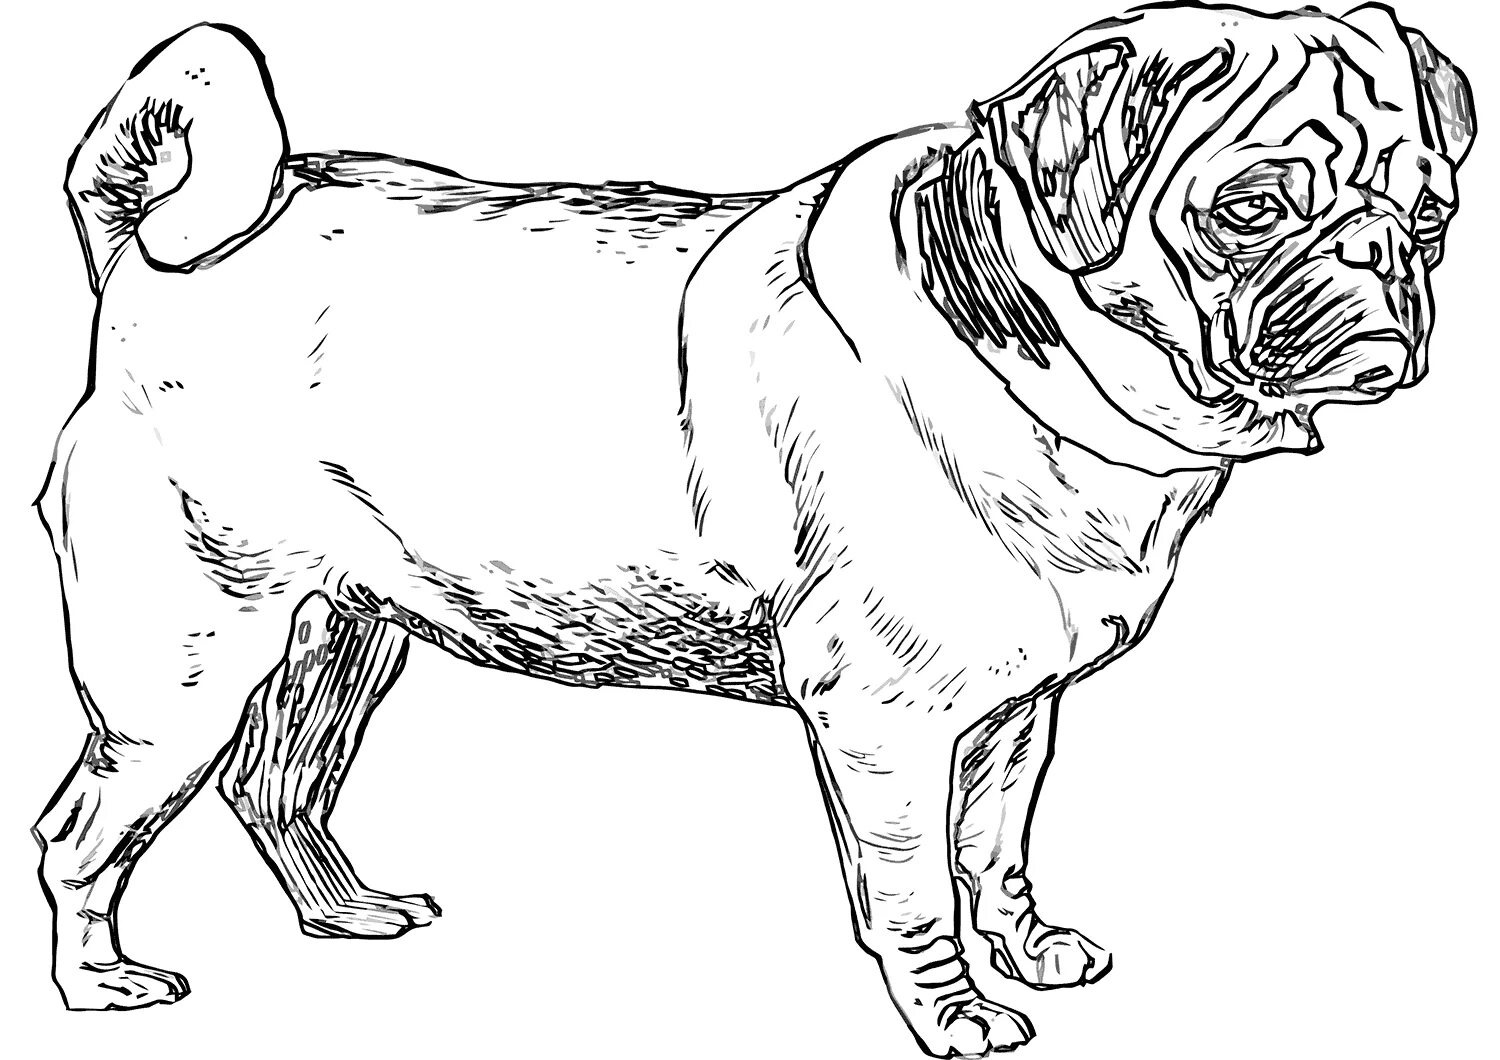 Exciting pj pug coloring page